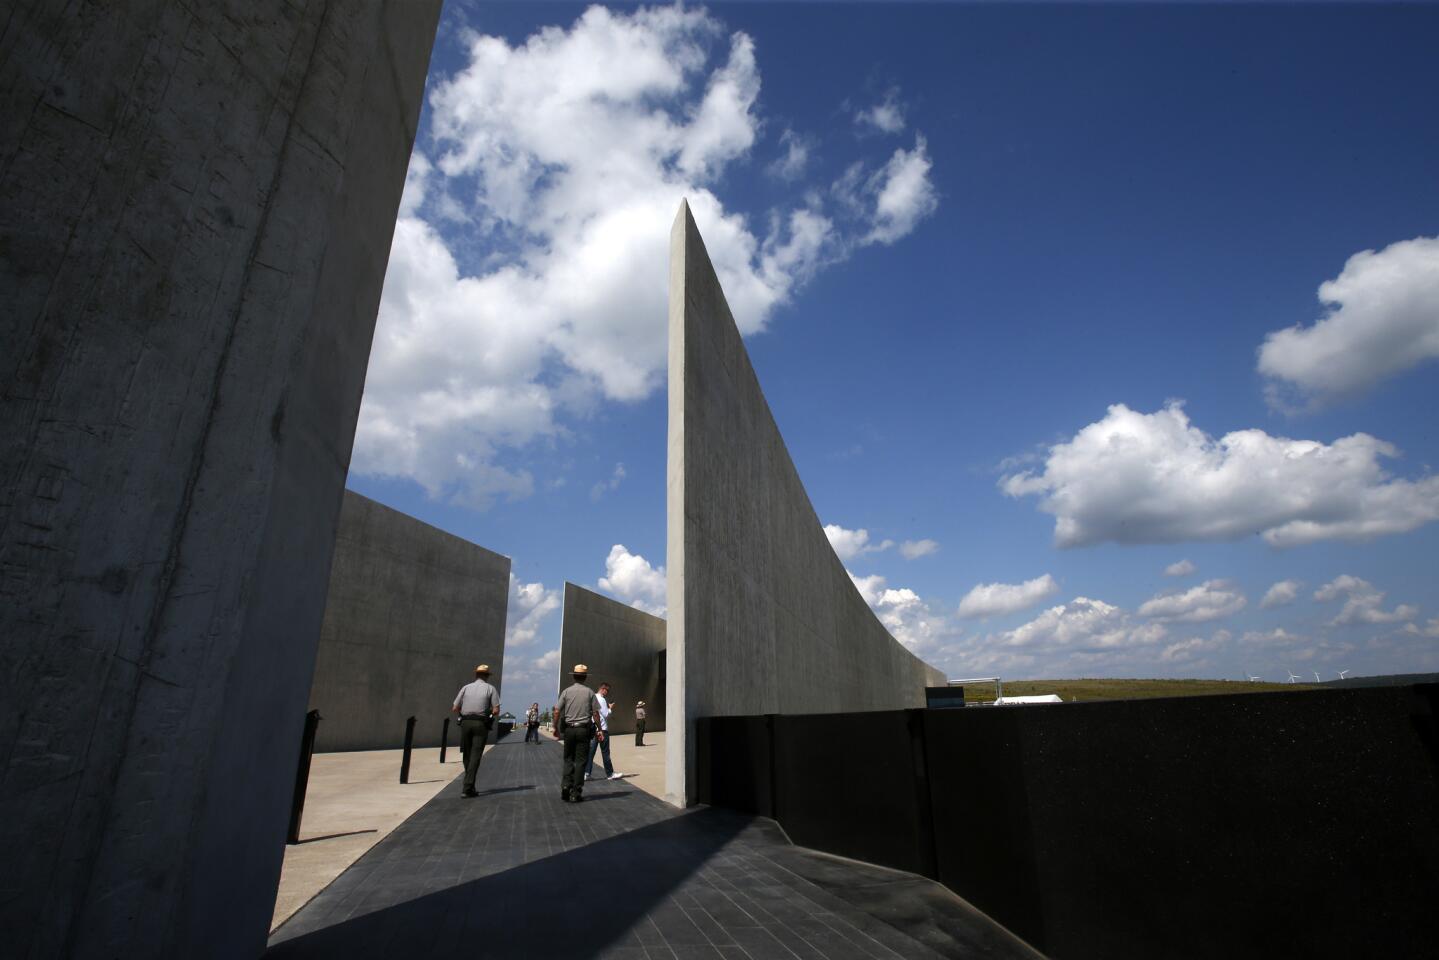 The Flight 93 National Memorial Visitor Center has been added to a complex that includes the Wall of Names, Memorial Plaza and a rock that marks the site of the plane crash.